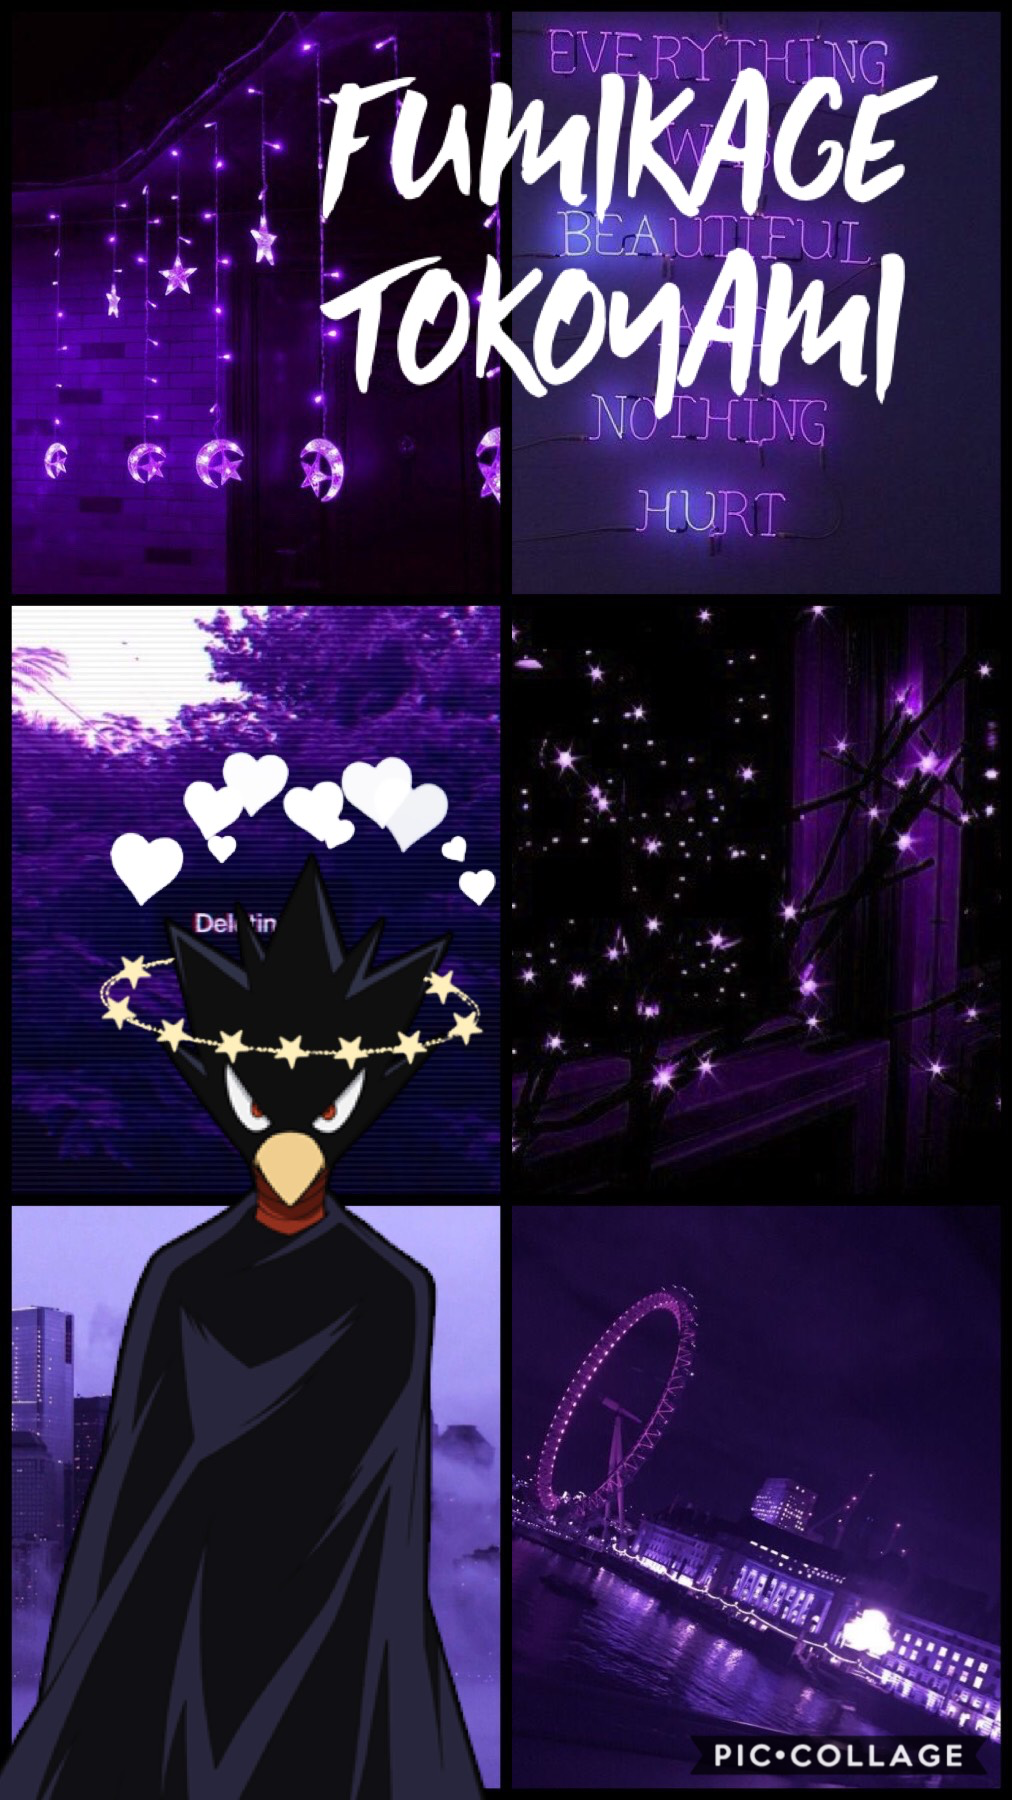 💜Fumikage Tokoyami💜

My friend requested that I make her a wallpaper for her art project so I made this bc Tokoyami is her favorite character 